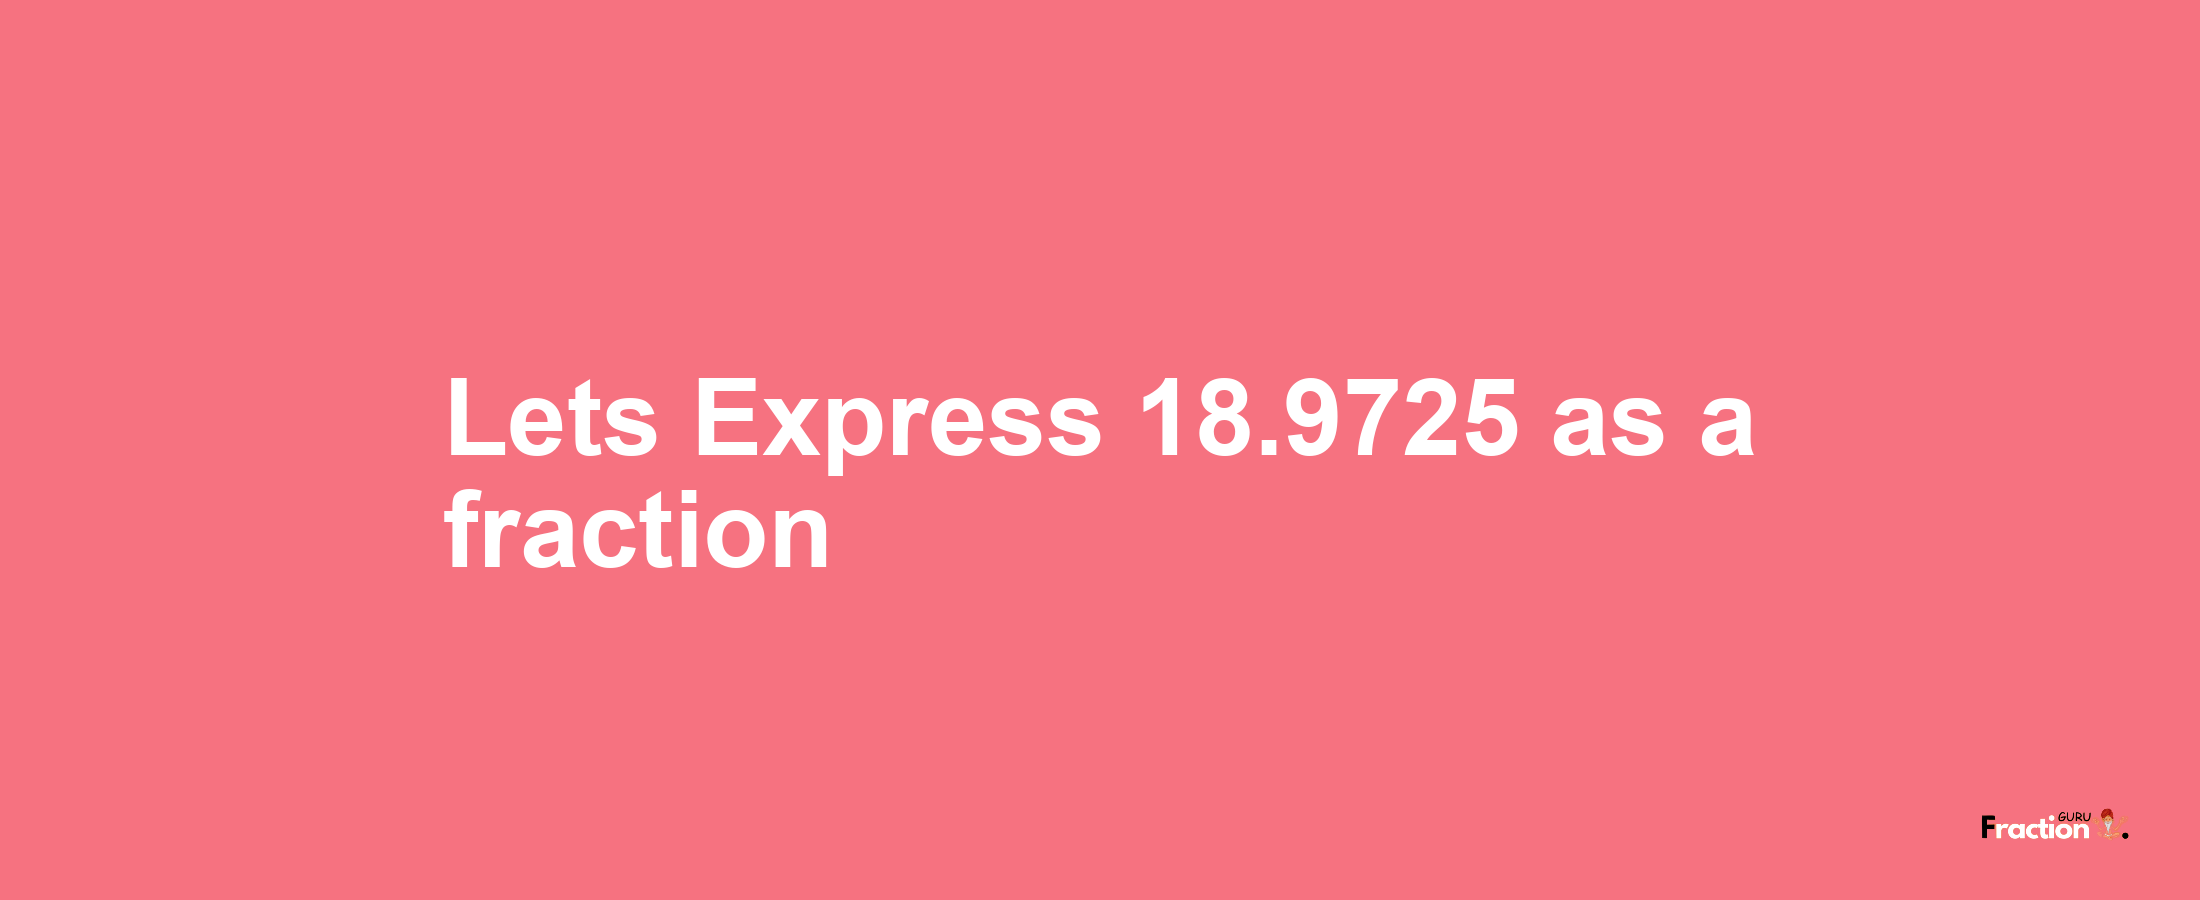 Lets Express 18.9725 as afraction